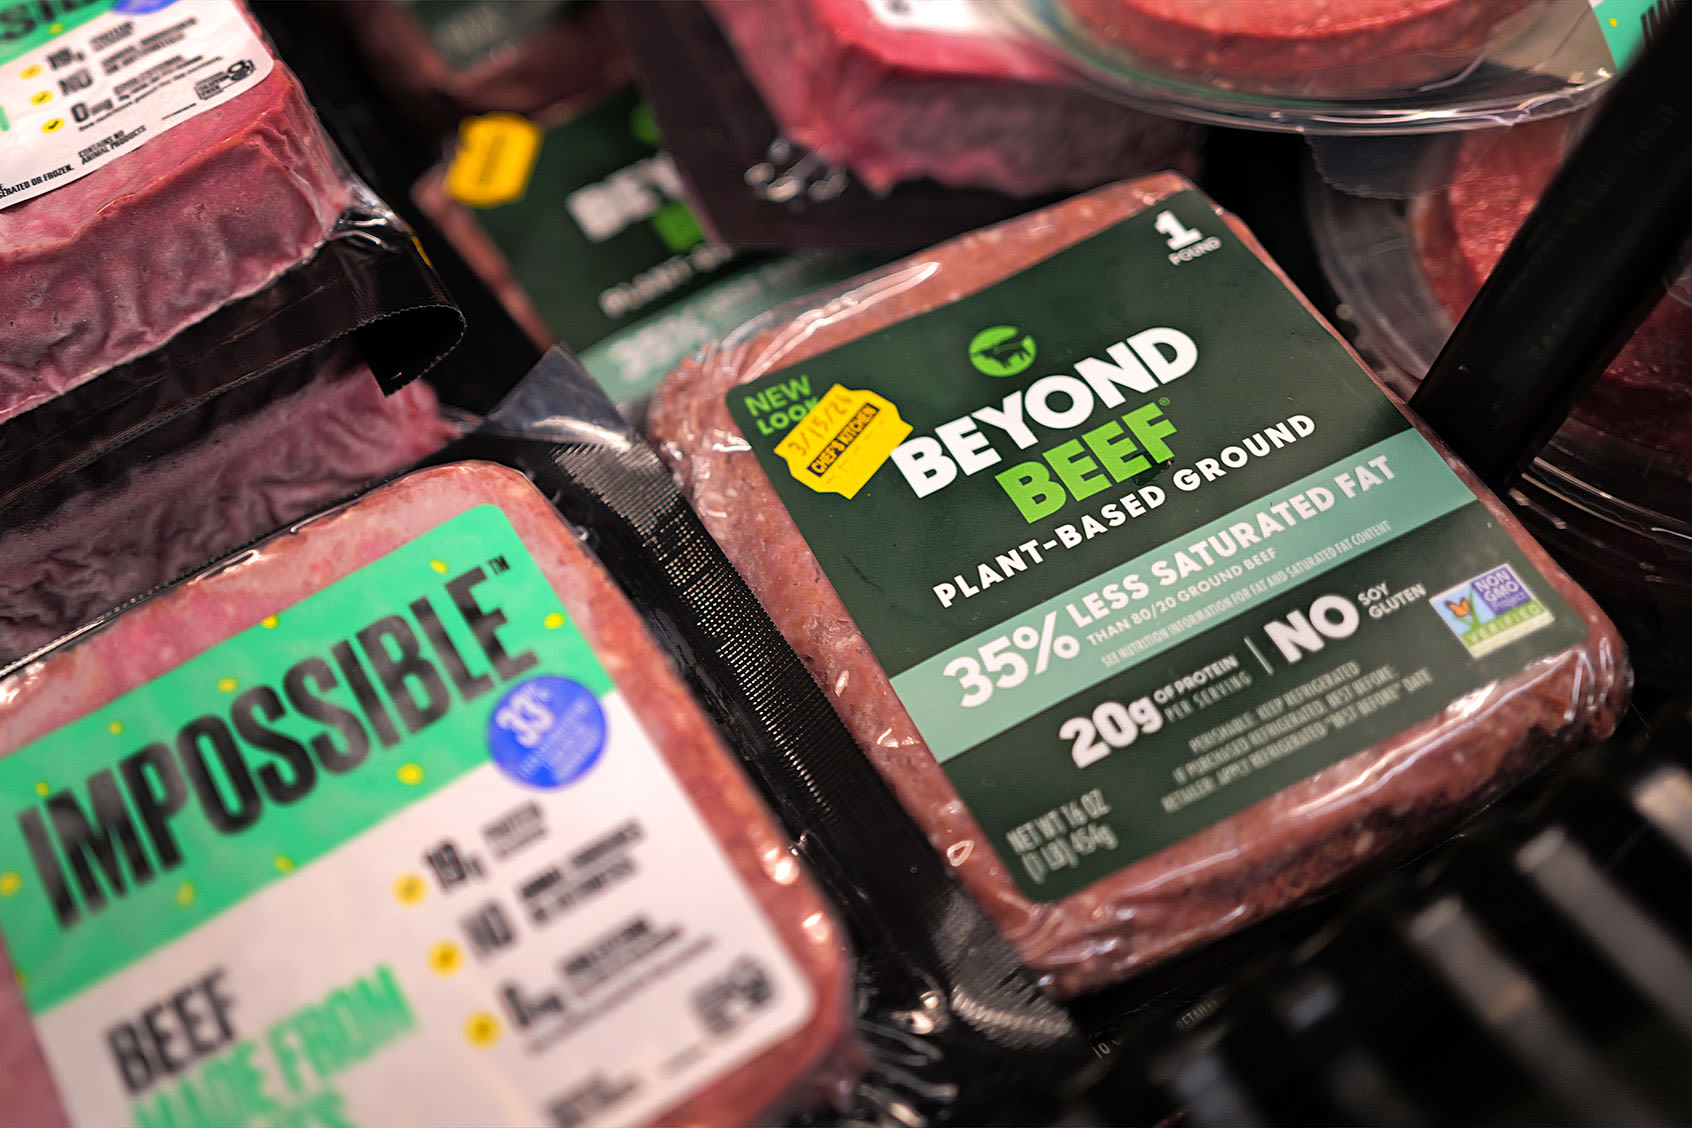 Lab-grown meat's PR problem offers an opportunity for plant-based products